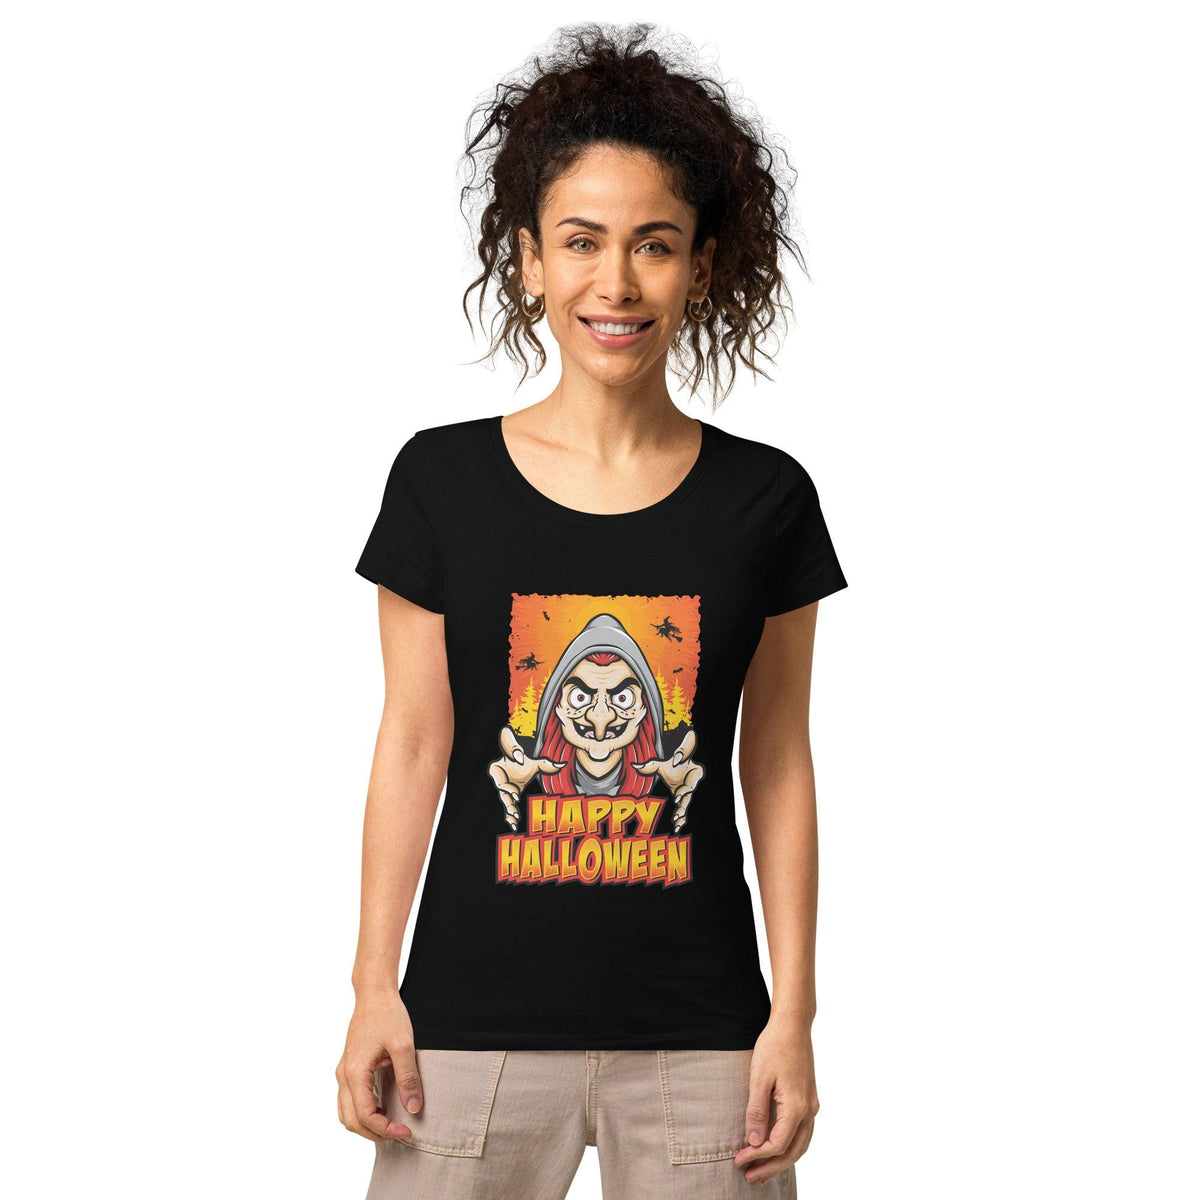 Organic women's Halloween tee with a hauntingly beautiful design, perfect for eco-conscious style.